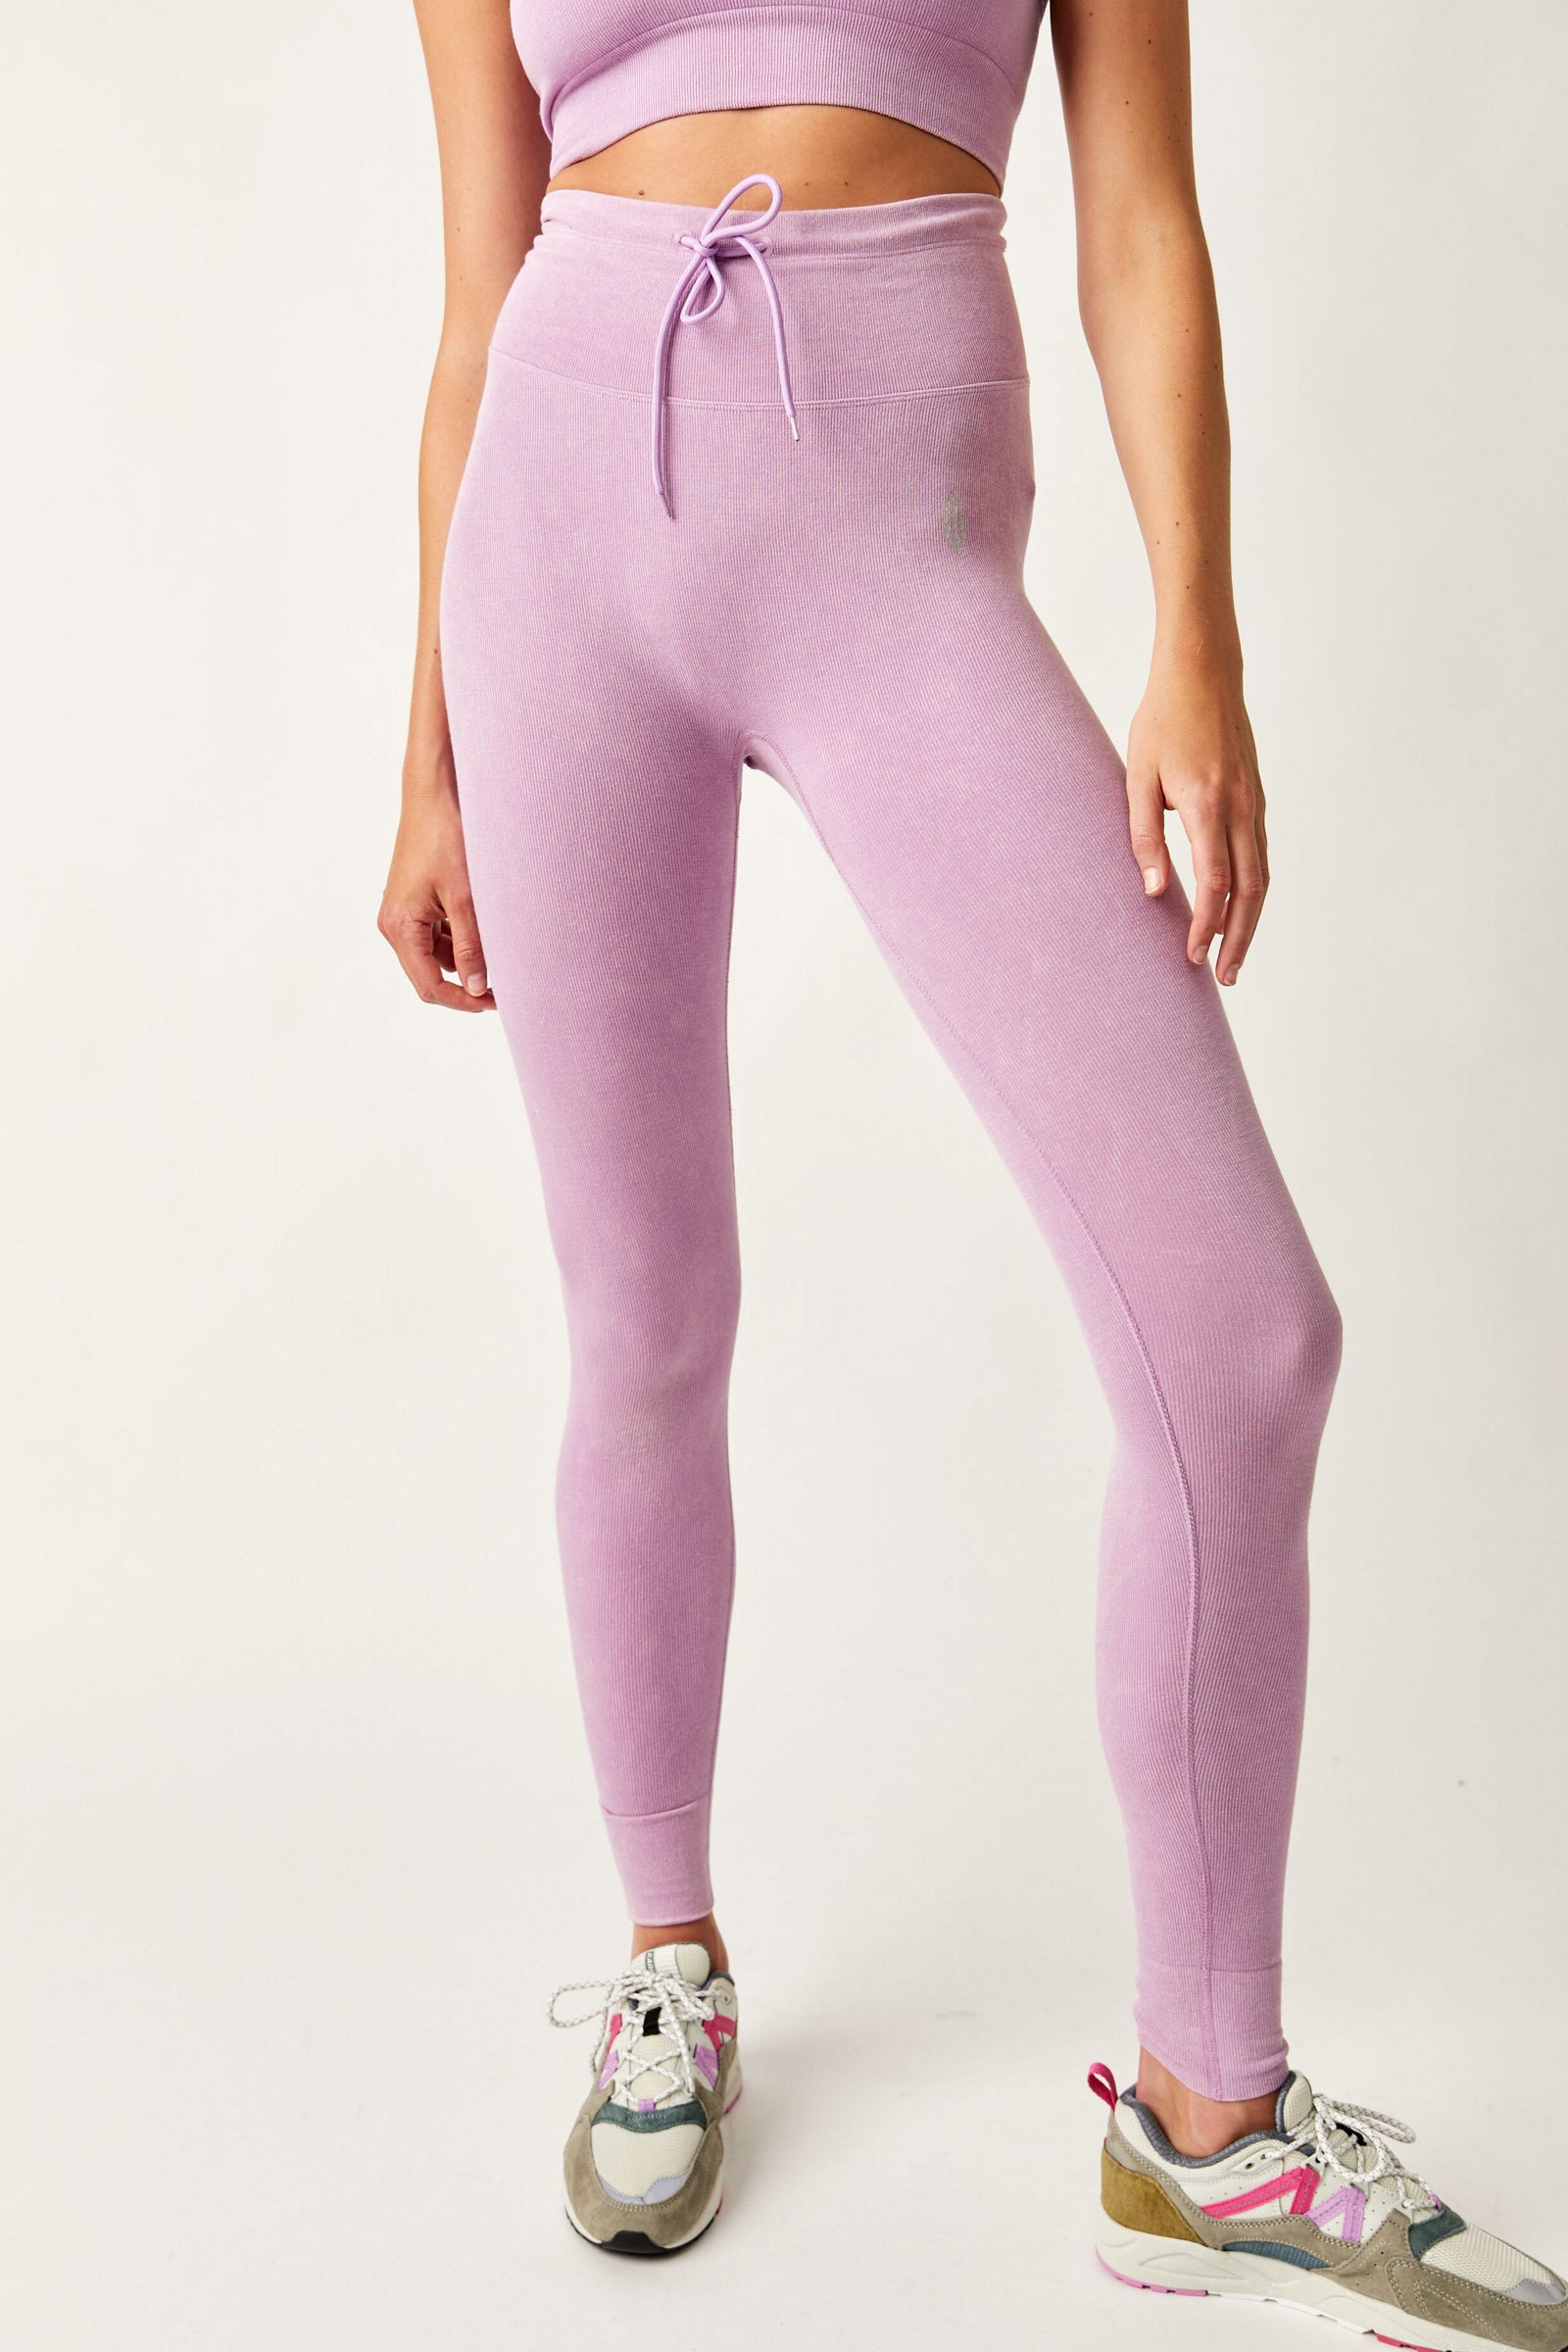 Free People Hybrid Yoga Leggings at YogaOutlet.com - Free Shipping